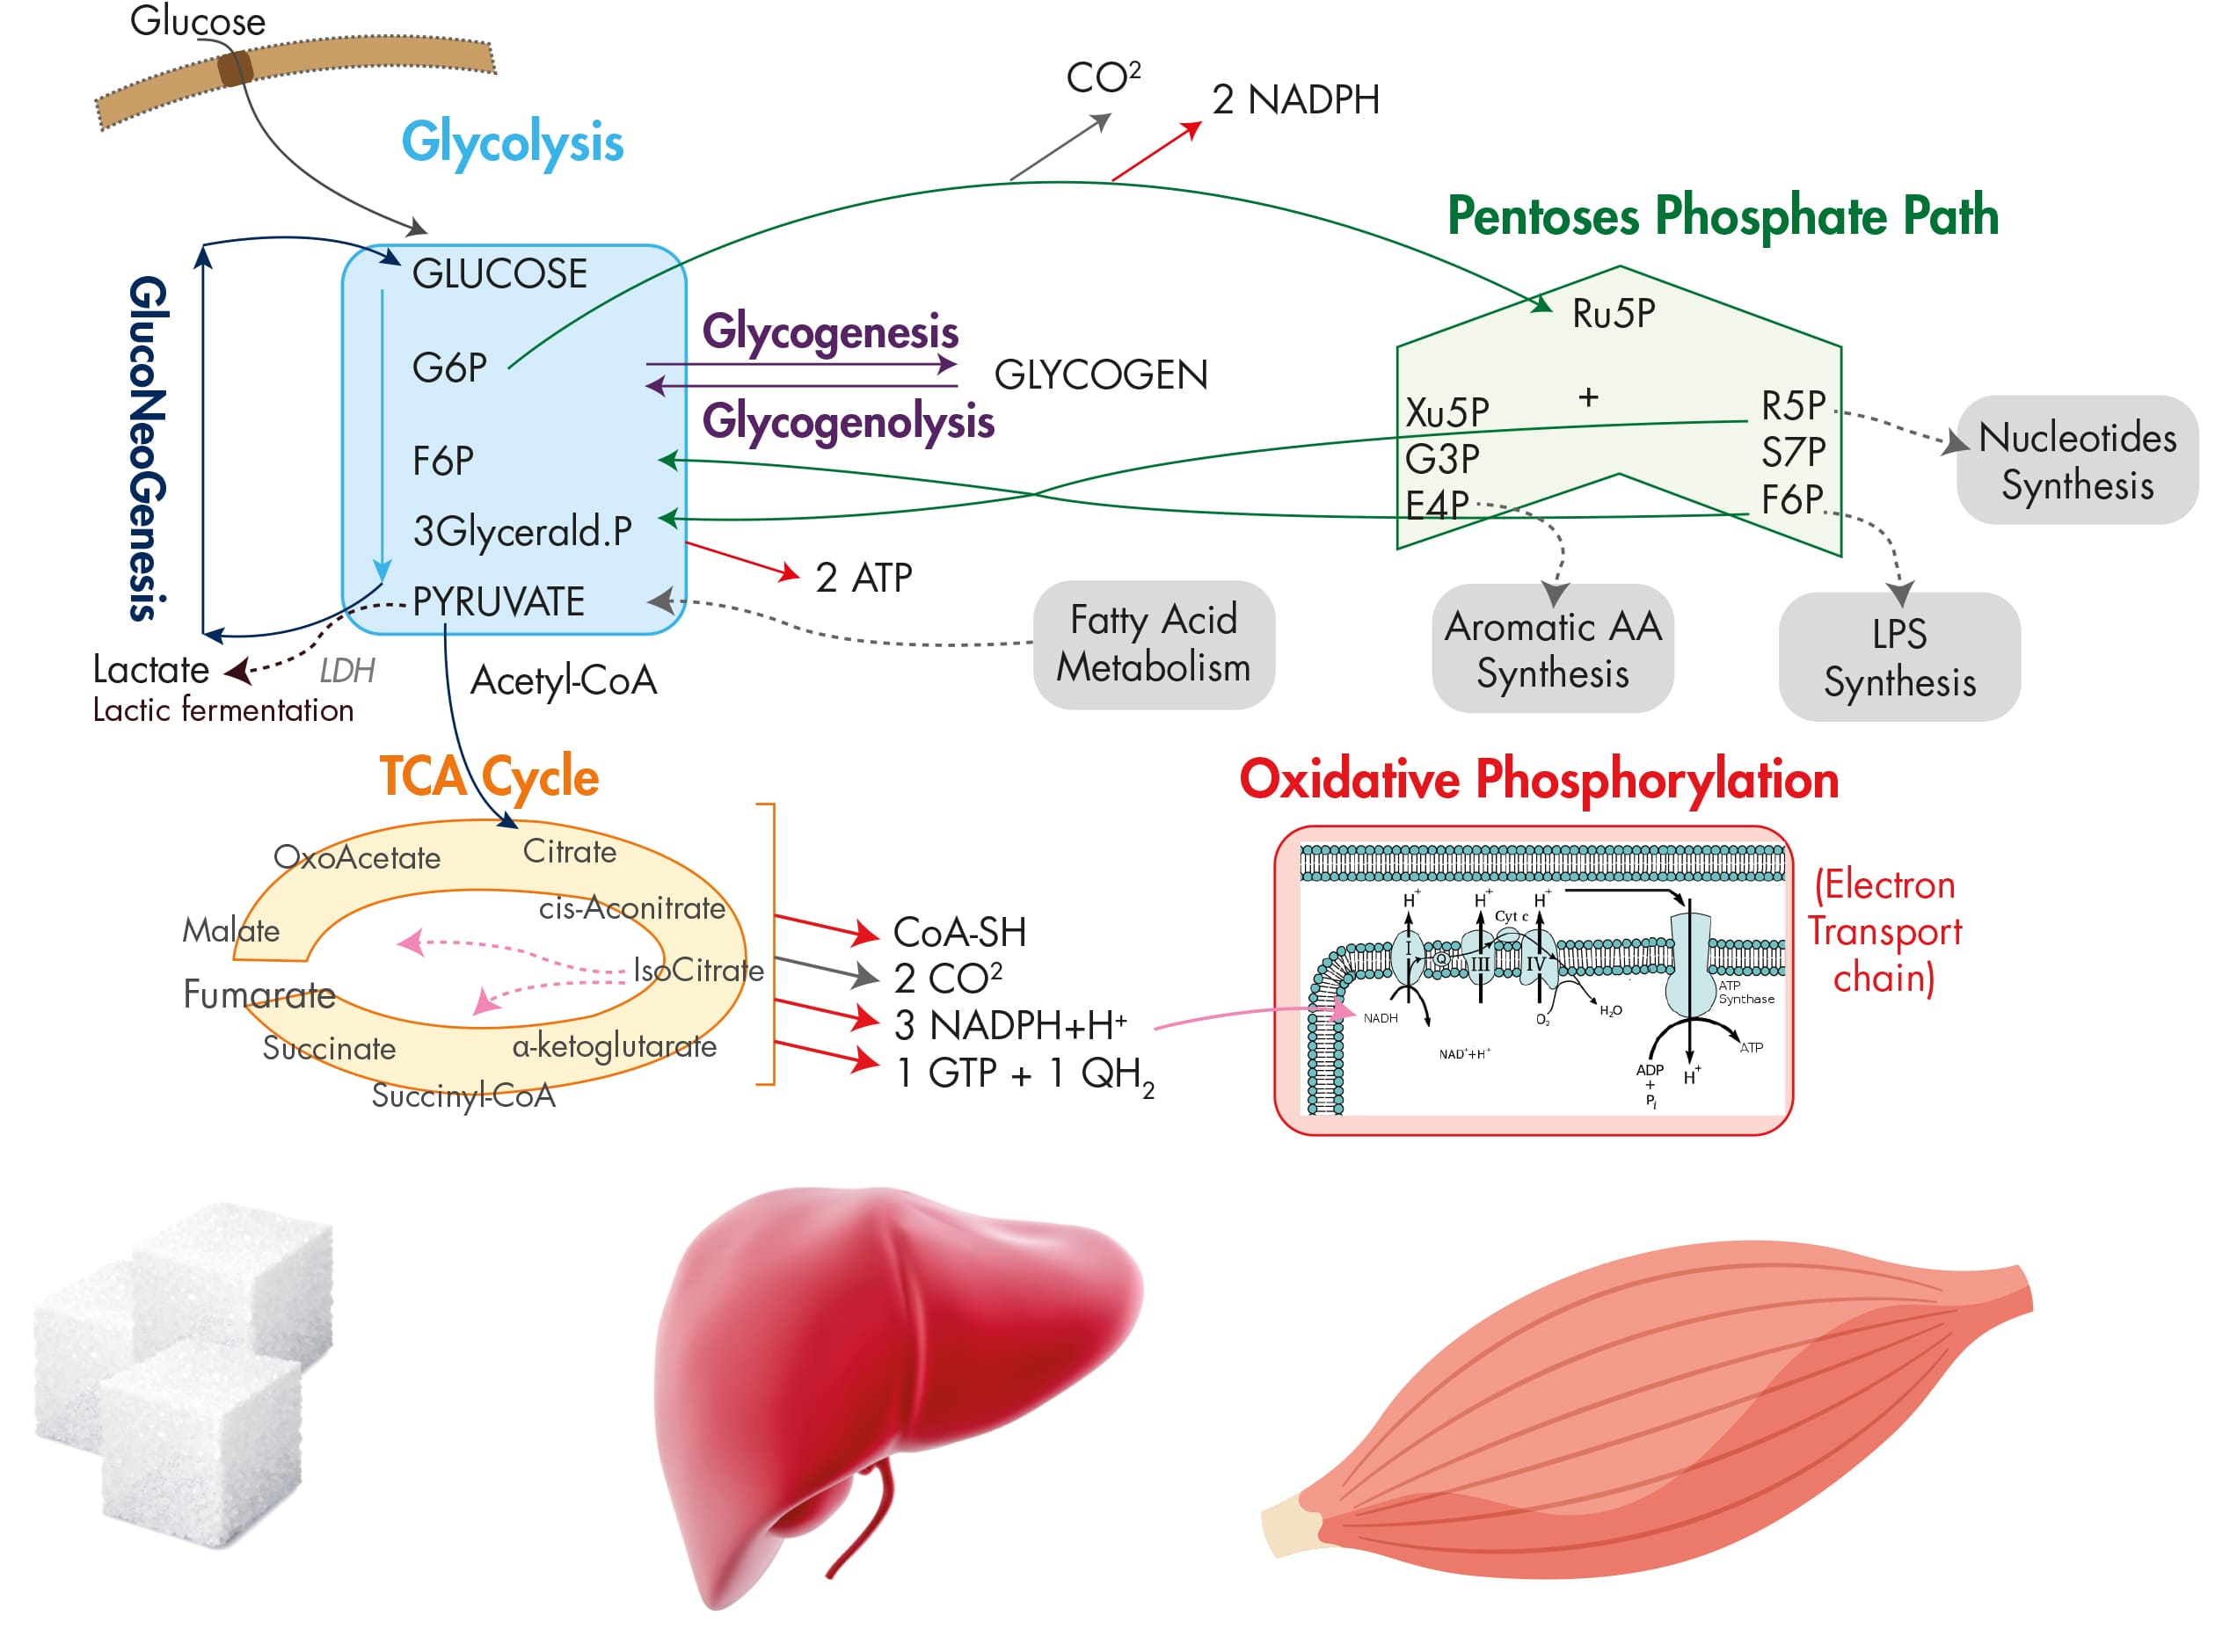 Glucose metabolism: study of pathways, enzymes and metabolites